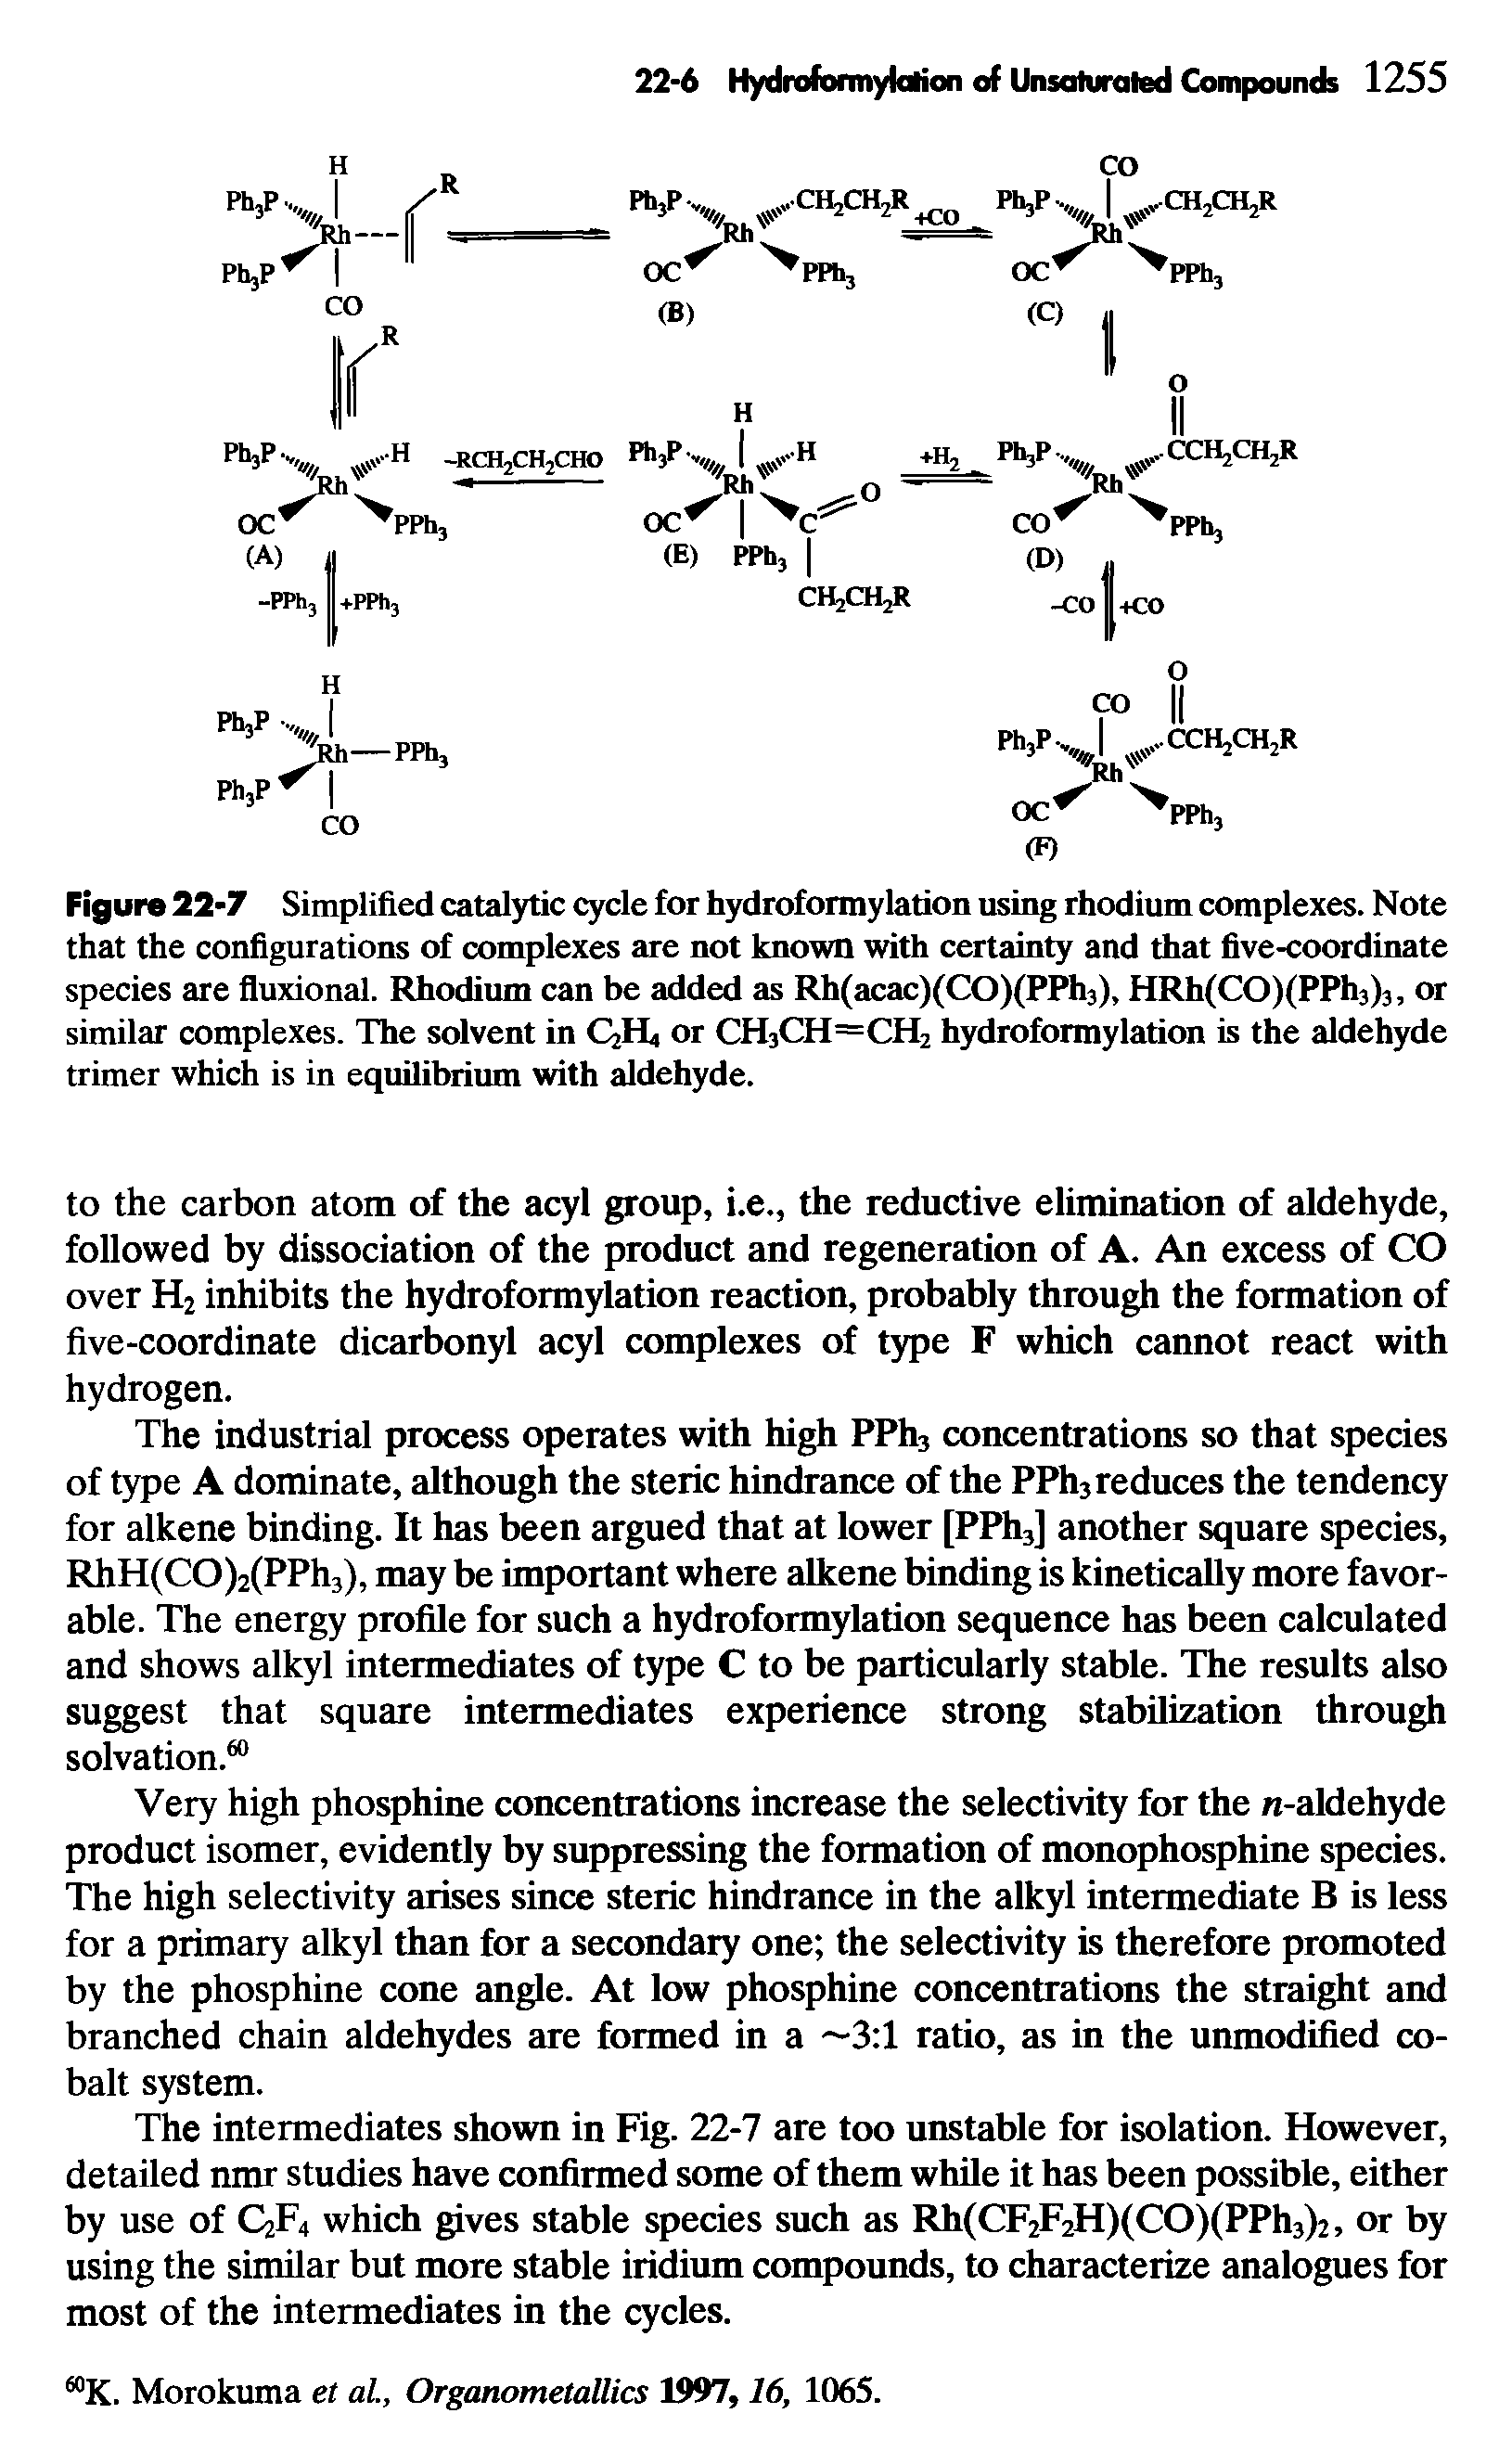 Figure 22-7 Simplified catalytic cycle for hydroformylation using rhodium complexes. Note that the configurations of complexes are not known with certainty and that five-coordinate species are fluxional. Rhodium can be added as Rh(acac)(CO)(PPh3), HRh(CO)(PPh3)3, or similar complexes. The solvent in QH4 or CHjCH=CH2 hydroformylation is the aldehyde trimer which is in equilibrium with aldehyde.